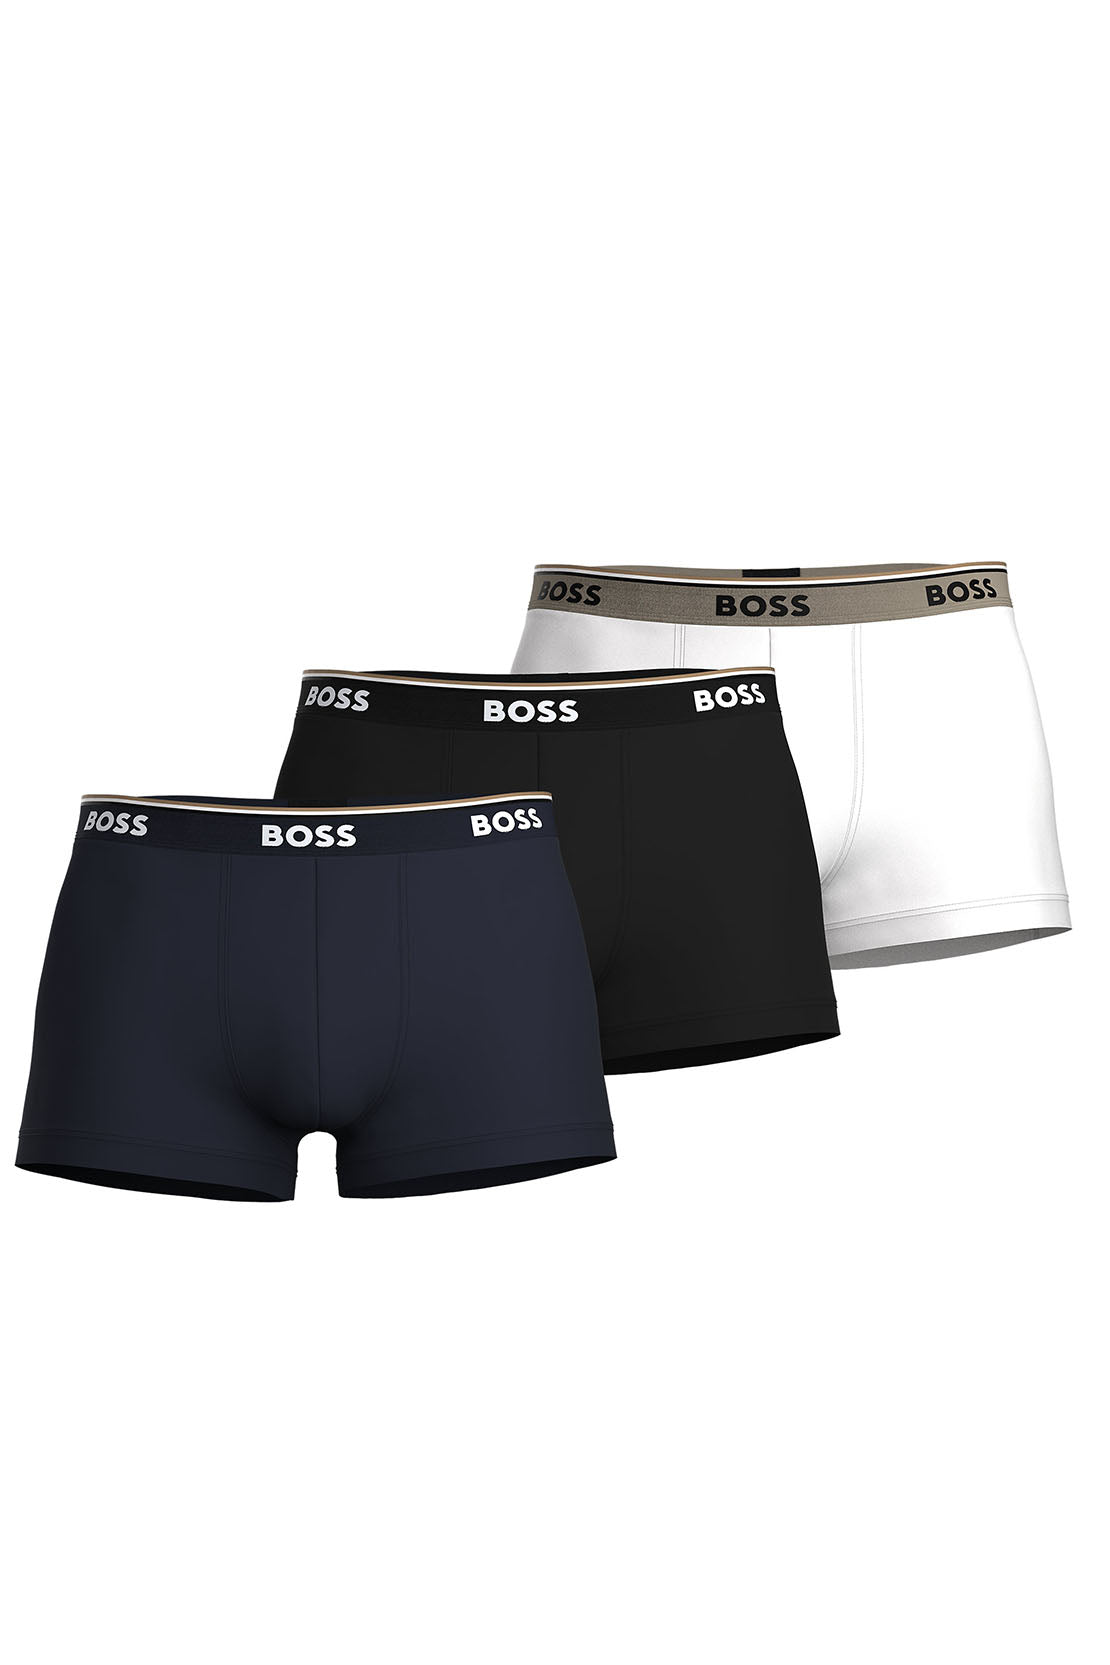 BOSS - 3-Pack Of Stretch Cotton Trunks With Logo Waistbands 50514928 979